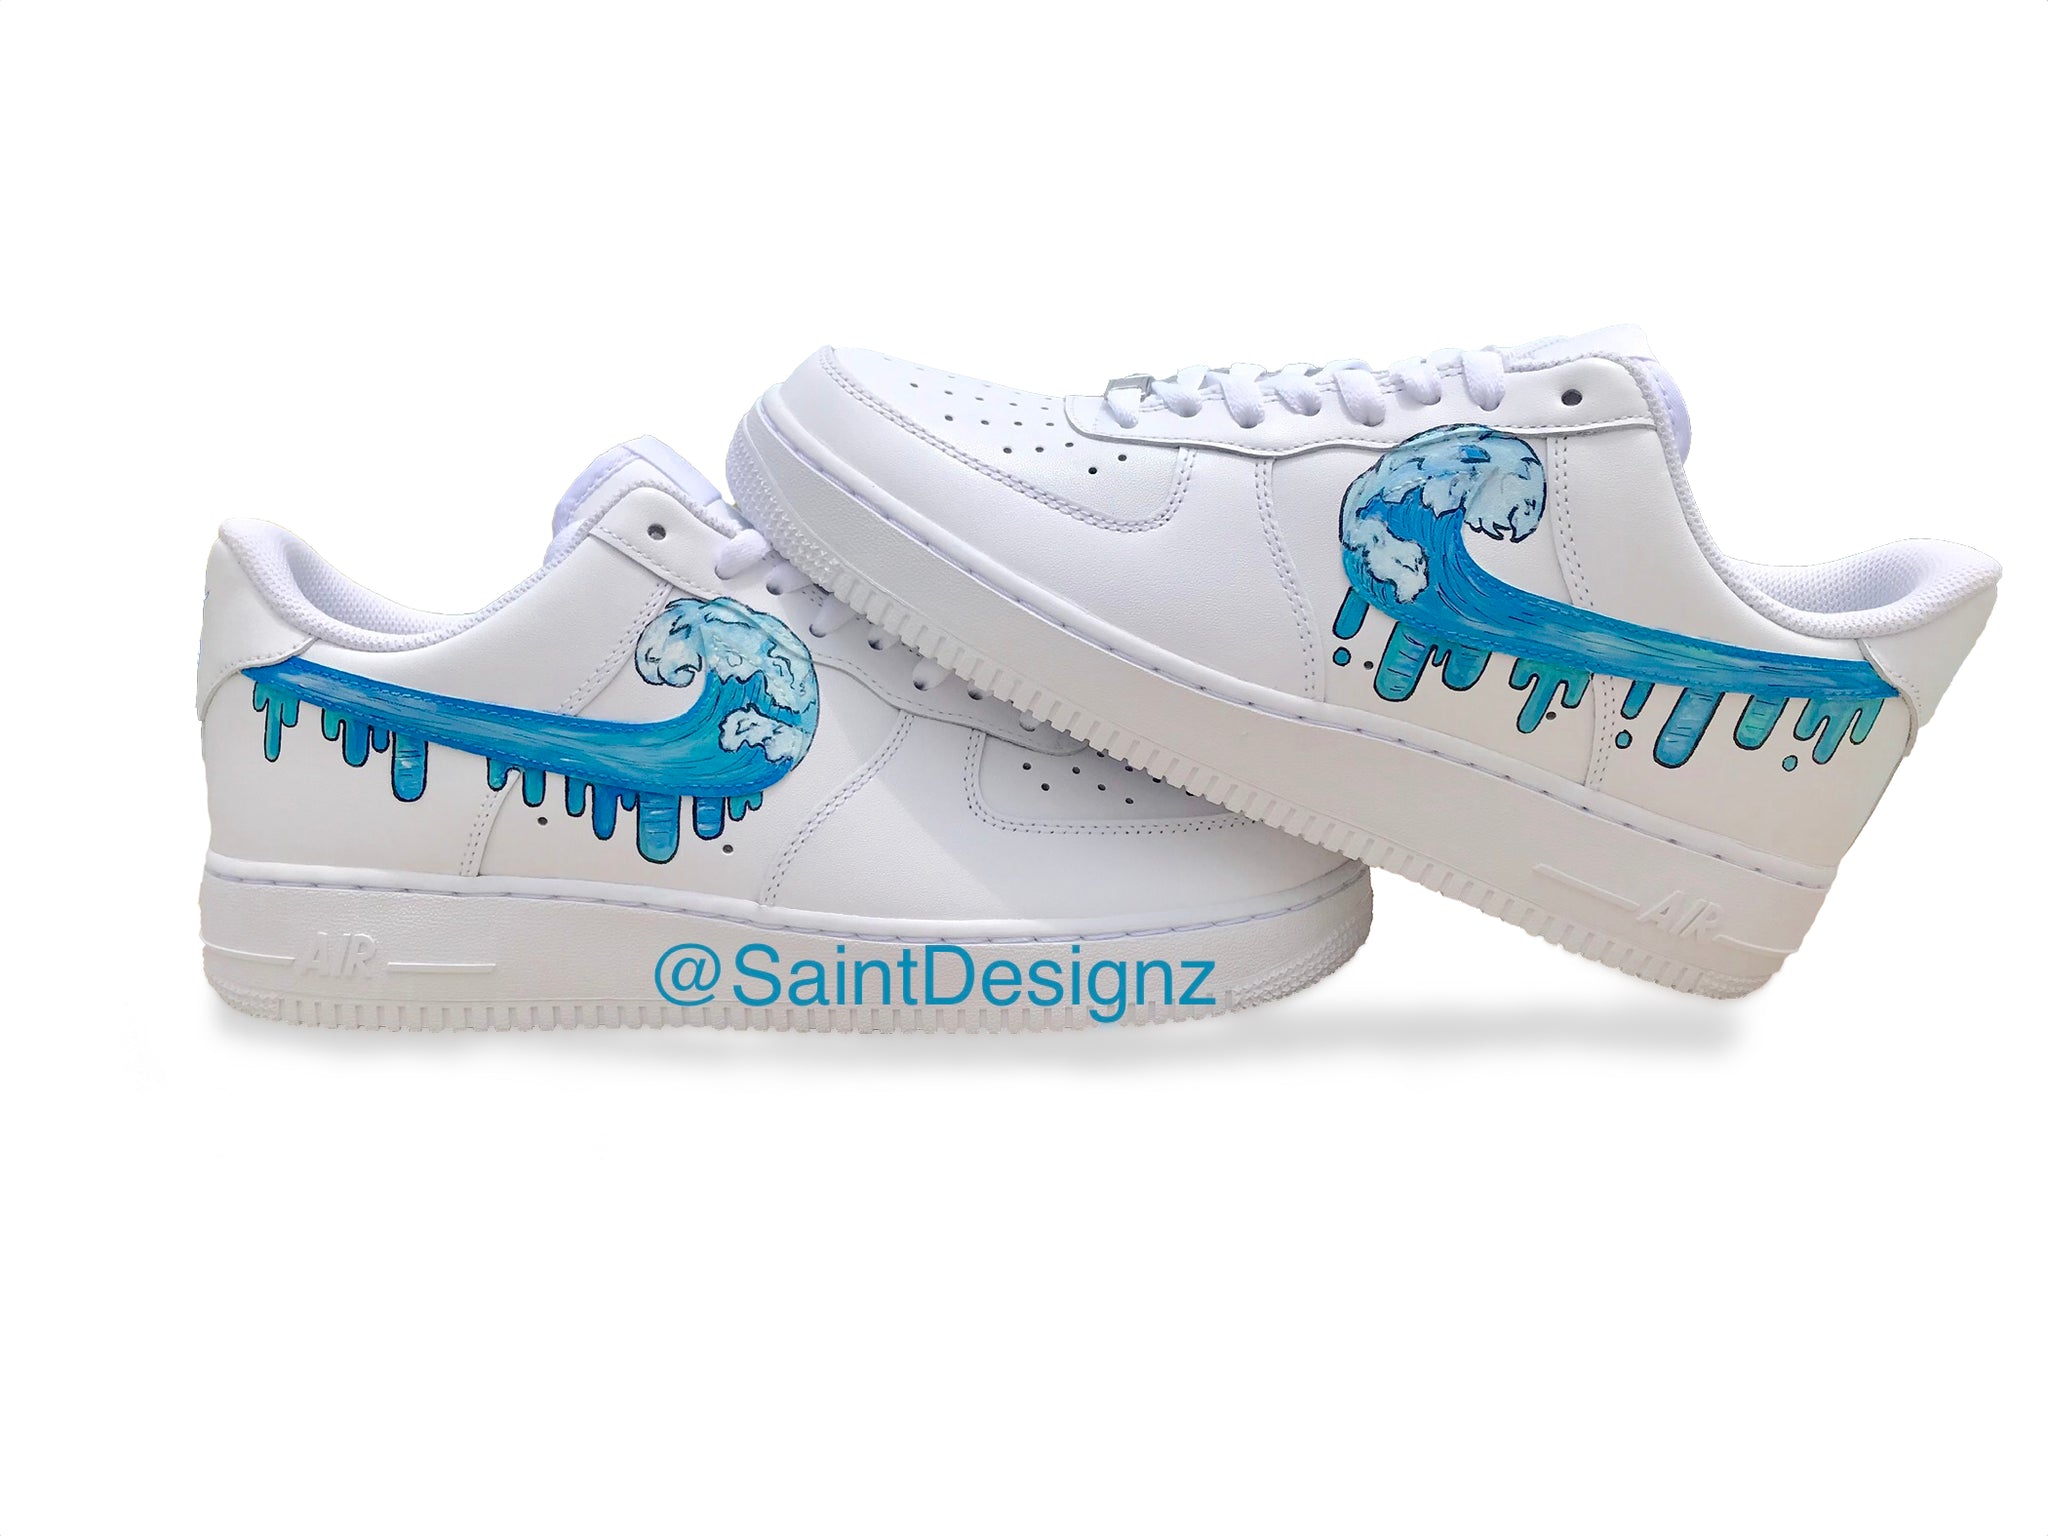 waves on air force 1